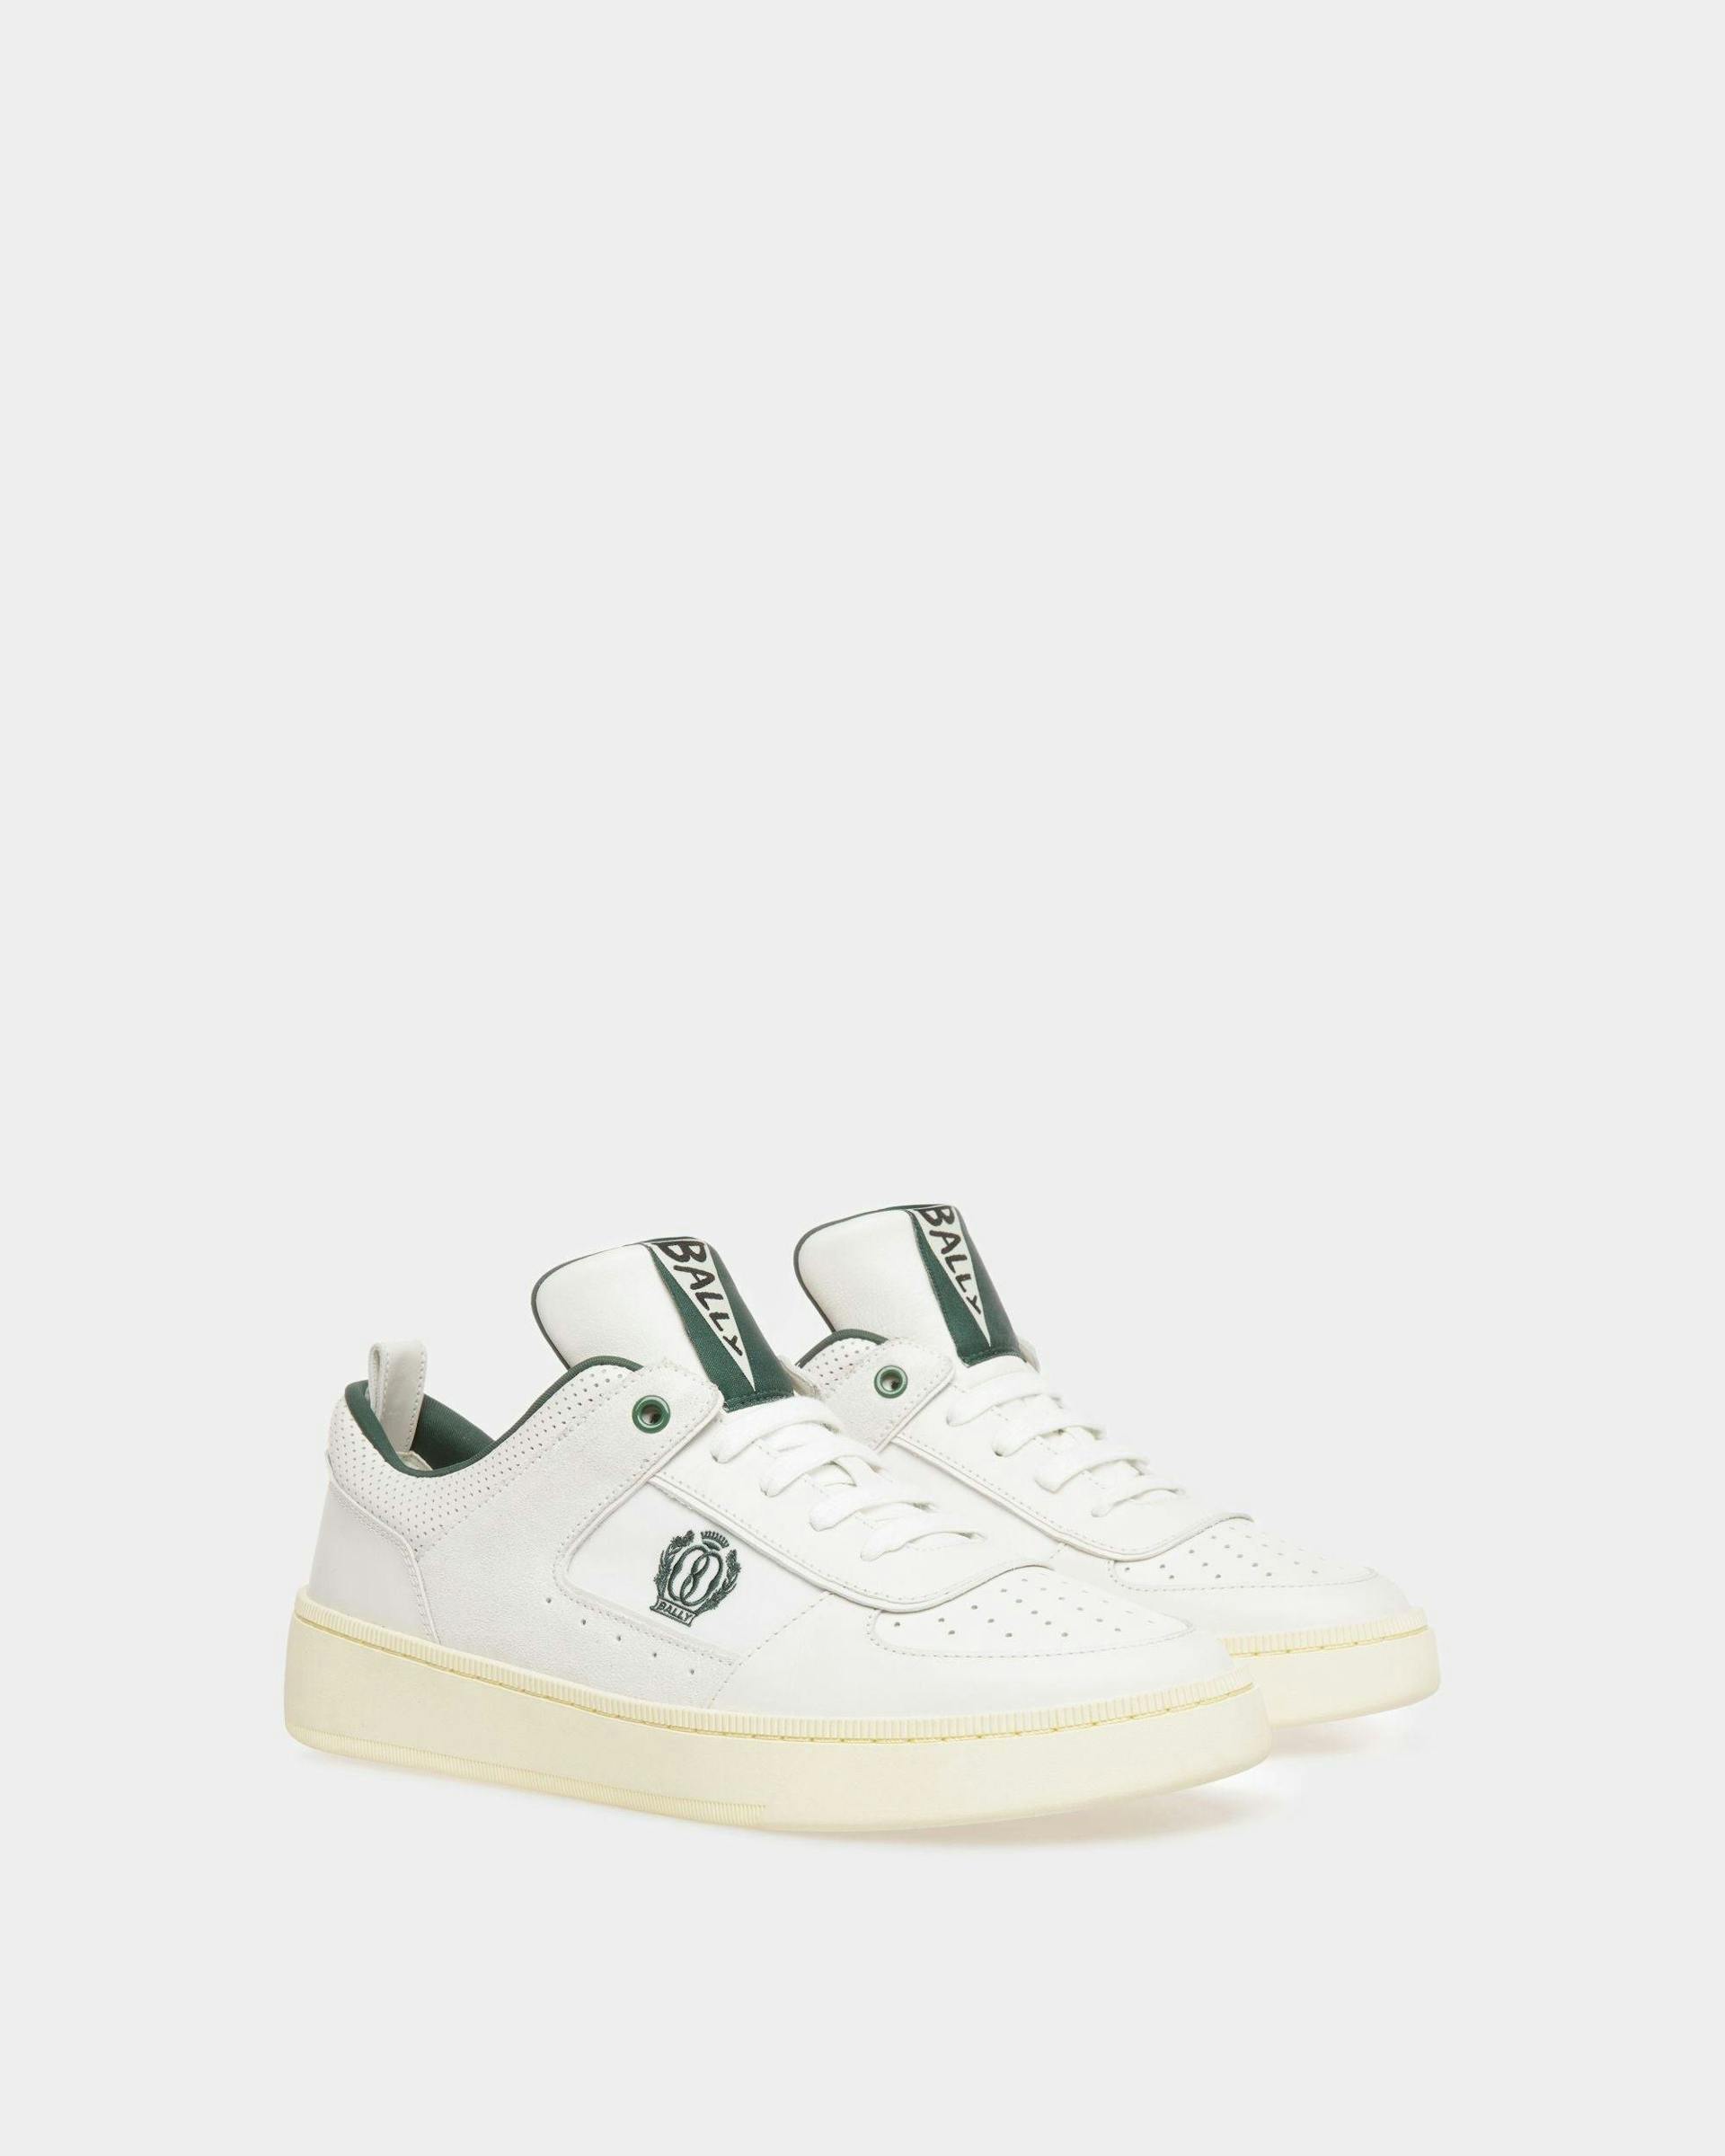 Raise Sneakers In White Leather - Men's - Bally - 02